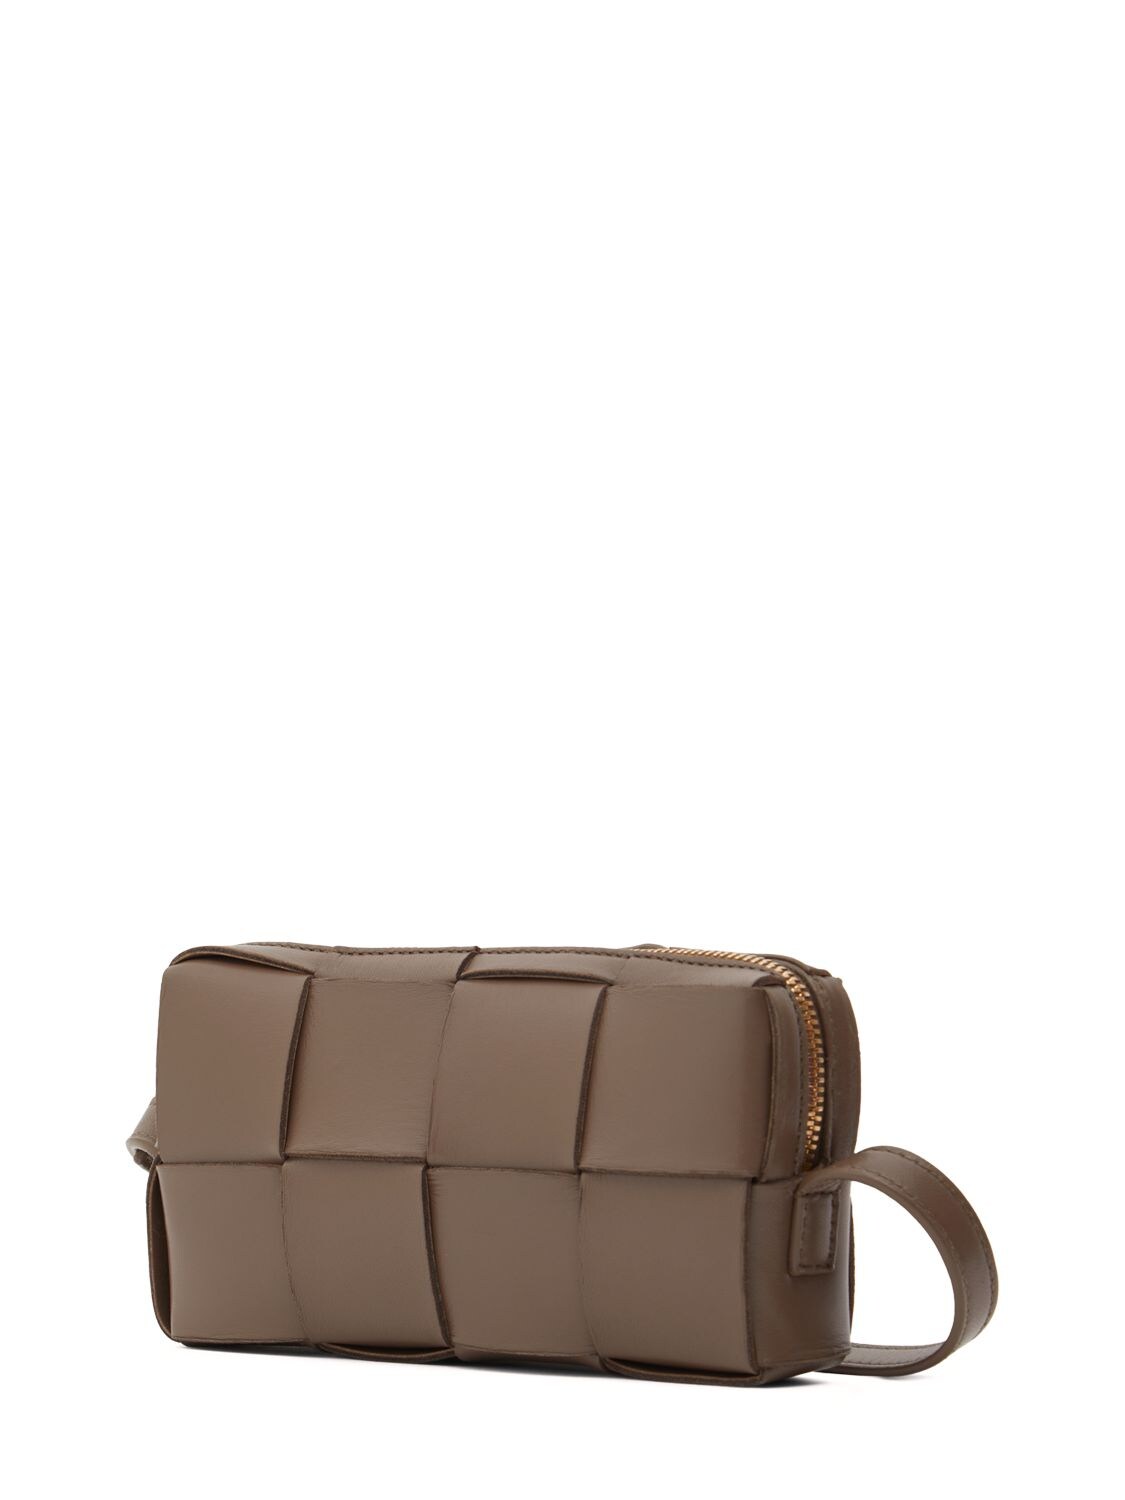  Taupe Cassette Candy Cross-body Bag